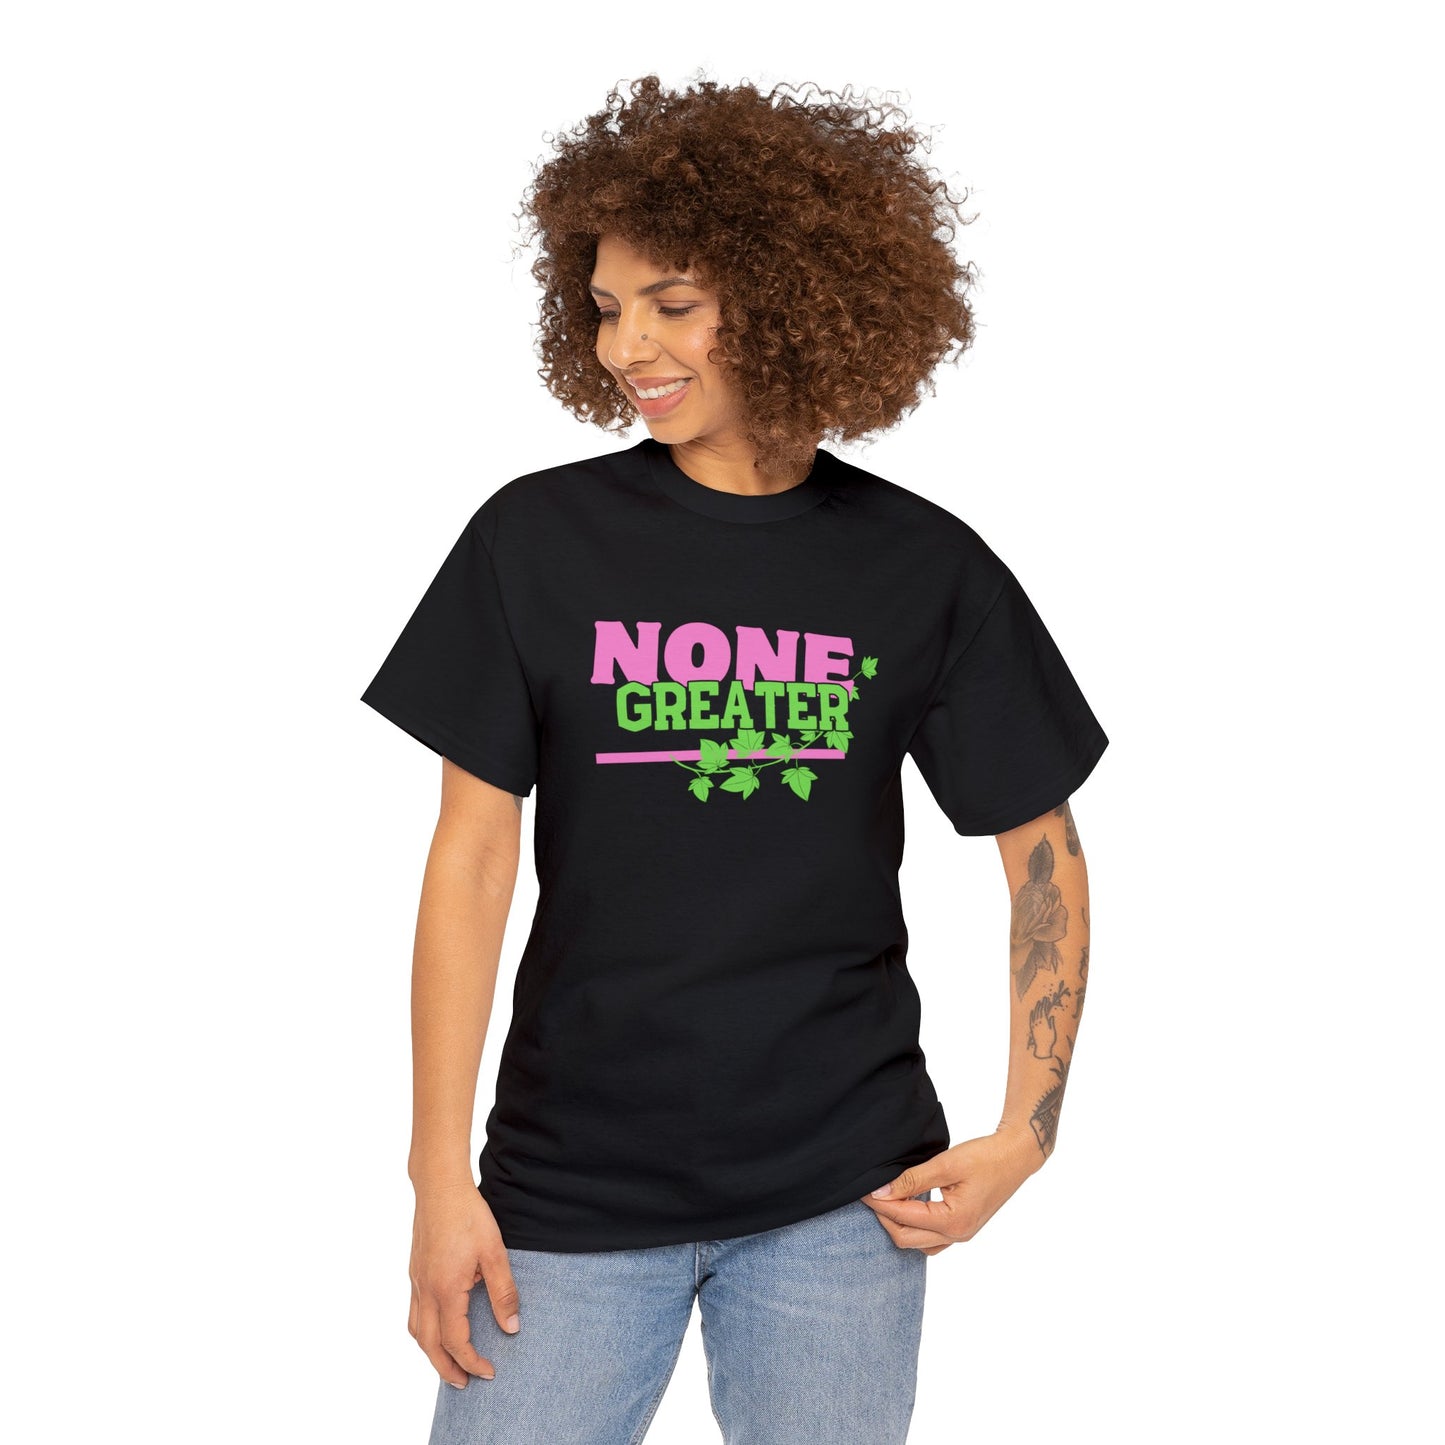 Black Unisex Heavy Cotton Tee saying "None Greater " in Pink/Green Letters w/Ivy Vine in background.